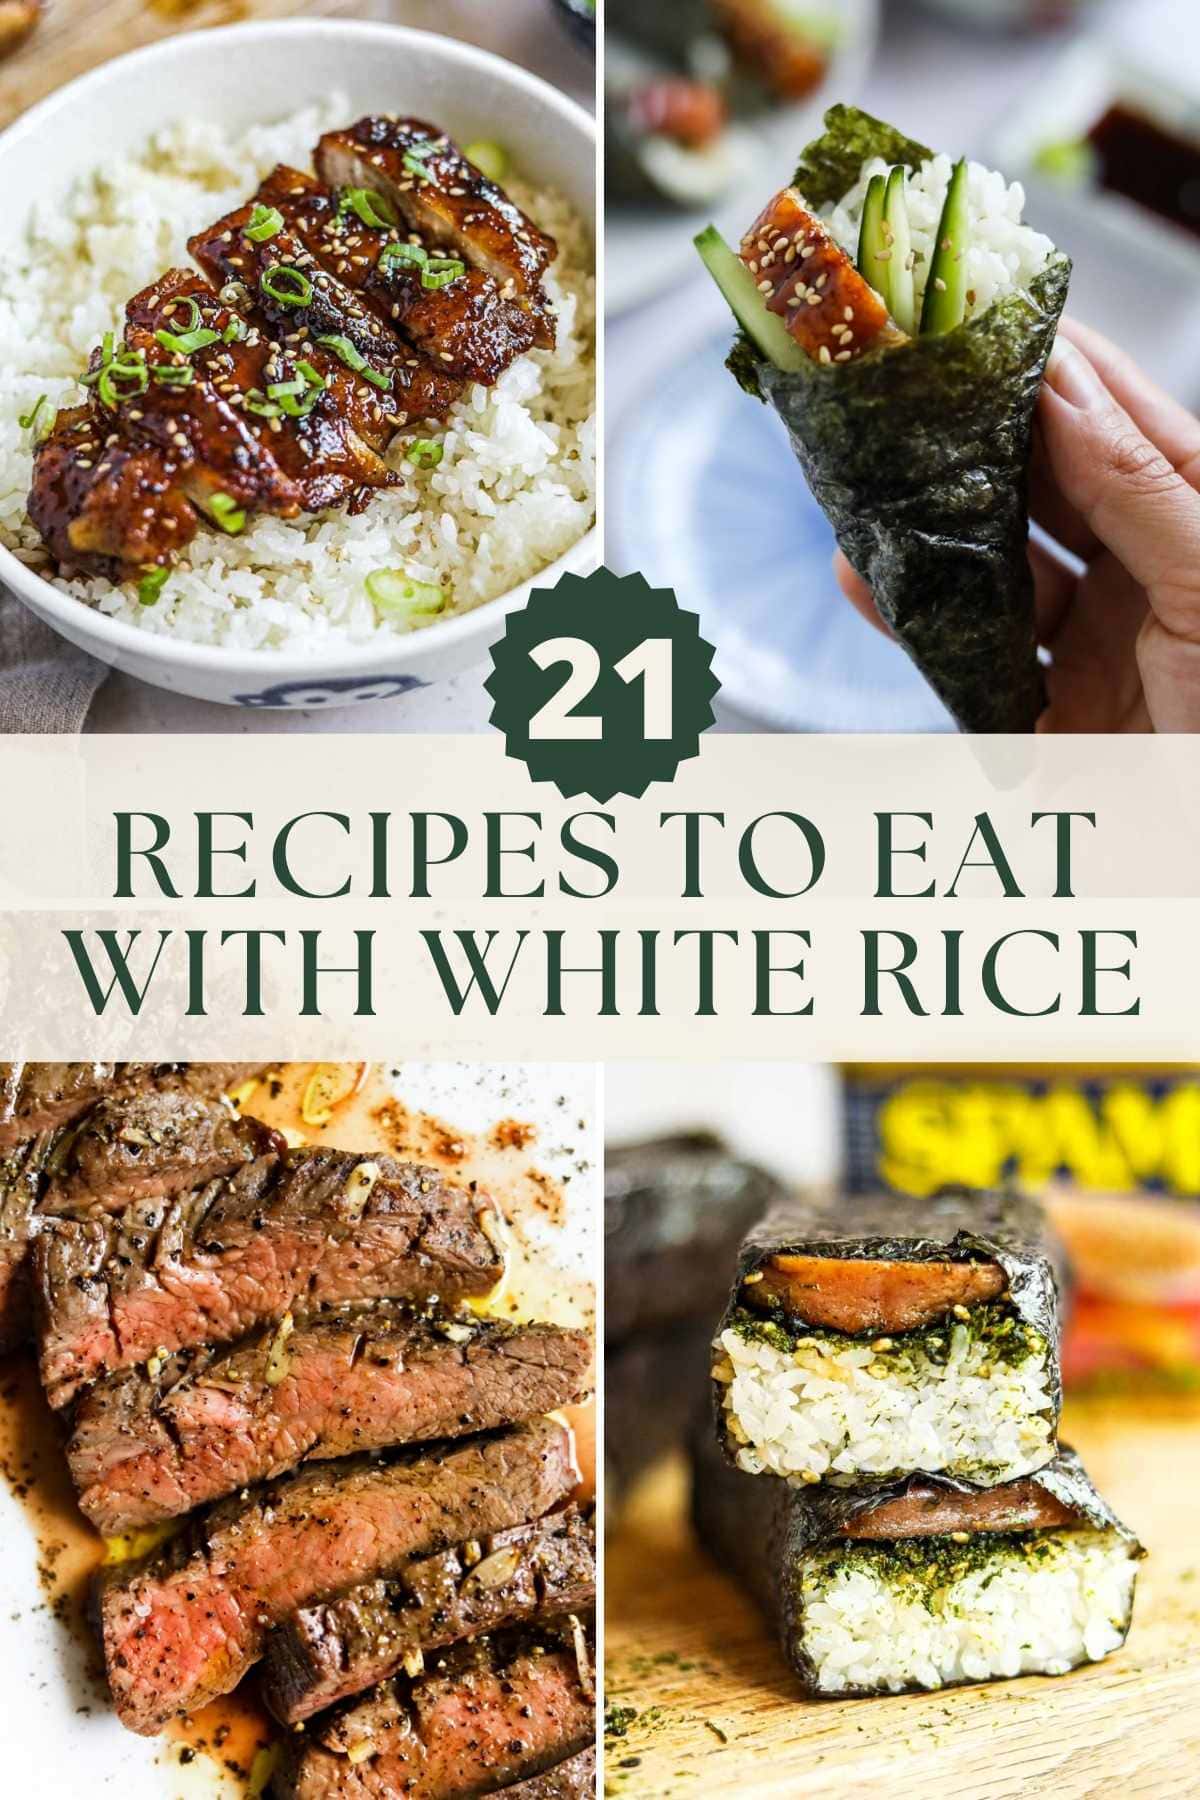 21 recipes to eat with white rice, including sushi, steak, spam, chicken teriyaki, and more.